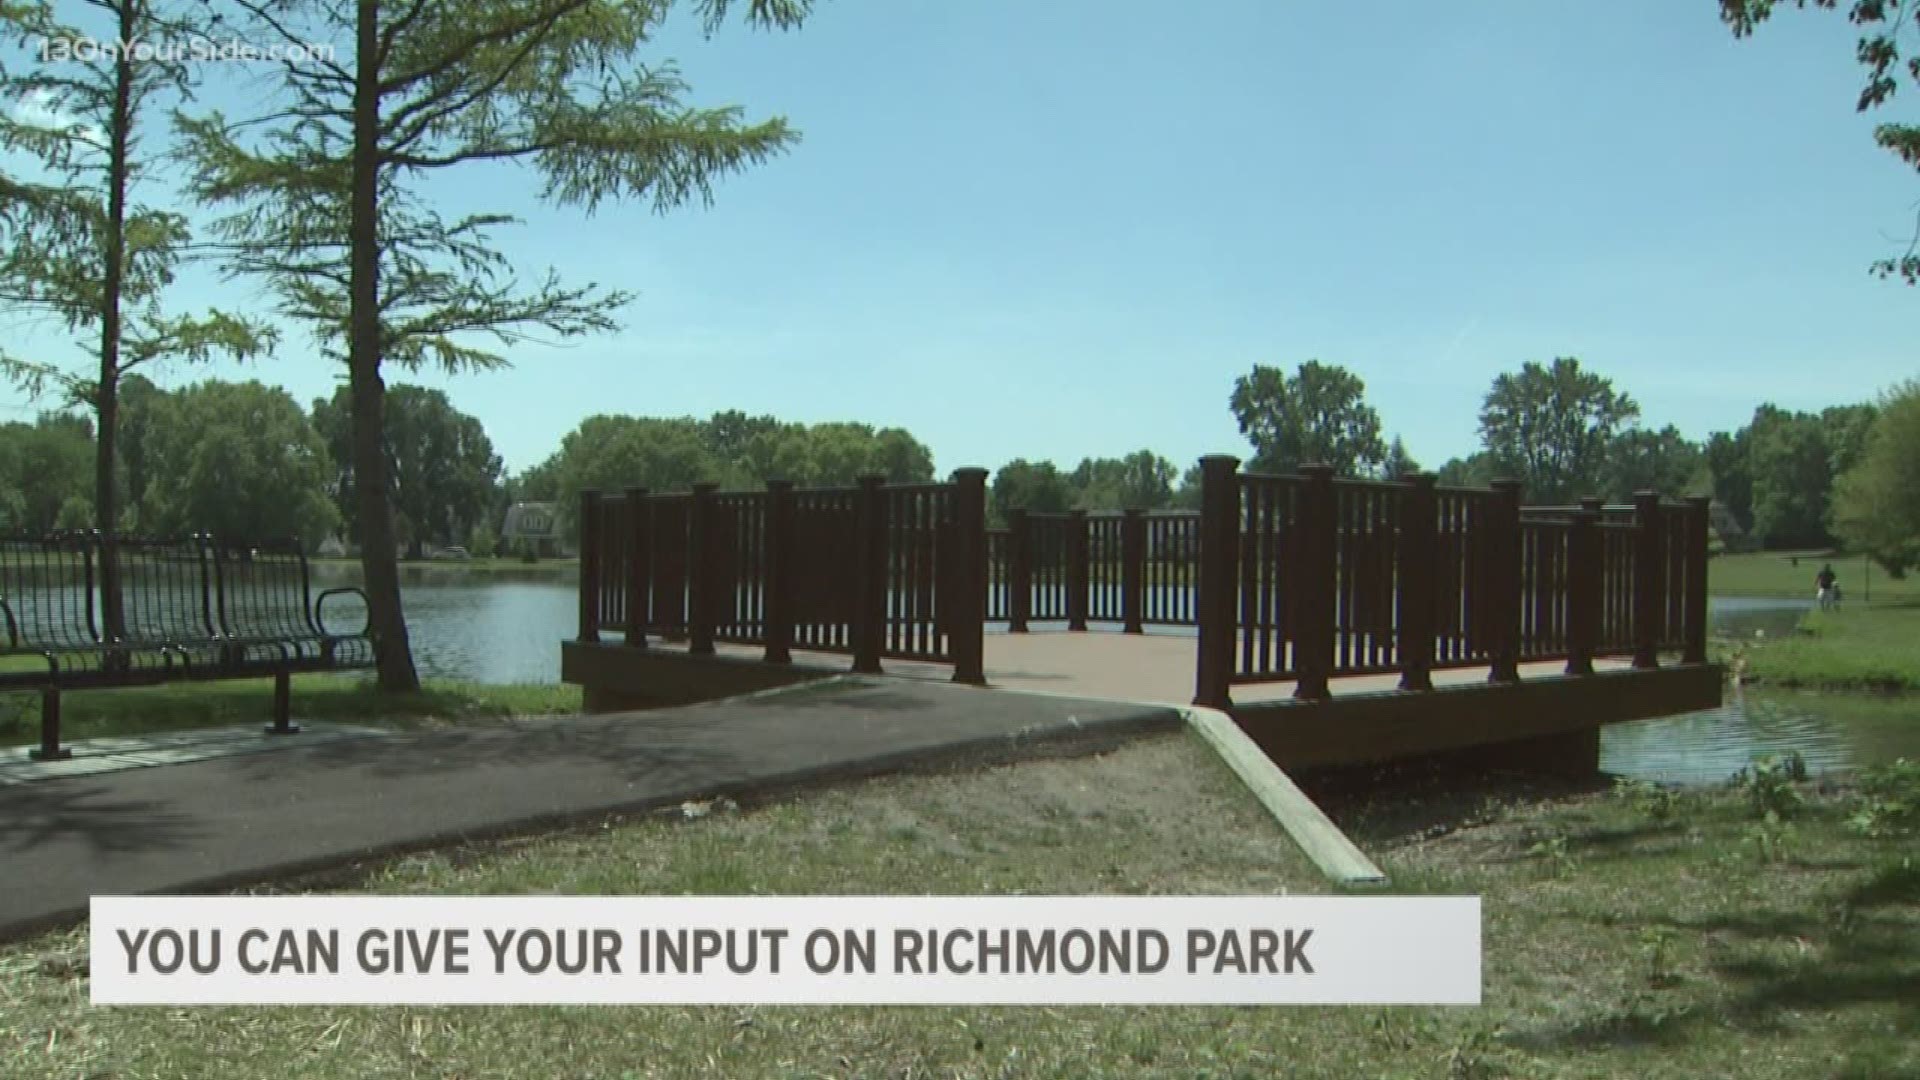 On Wednesday, July 10 you can help decide what the future will hold for Richmond Park. There will be a meeting at 6 p.m. at the park where you can give your feedback about what you'd like to see at the park in the future.